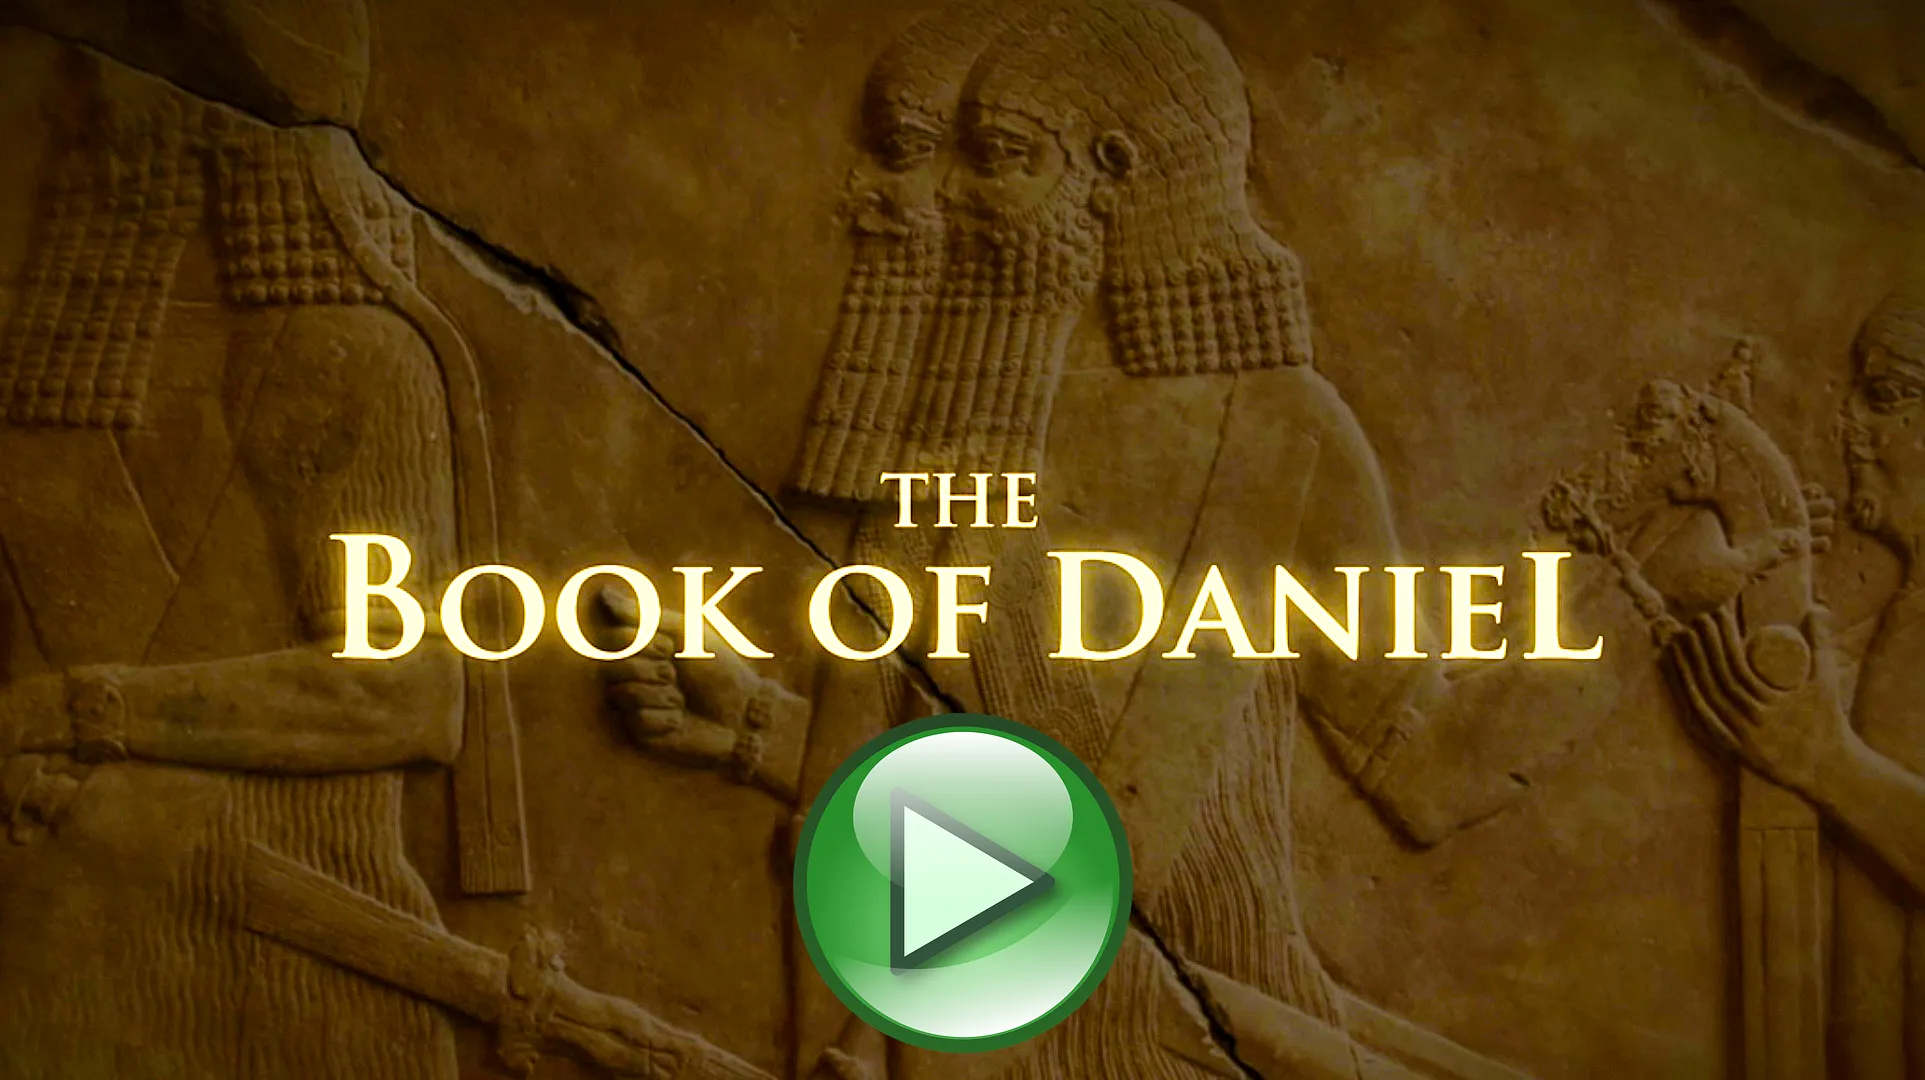 Clickable movie image for 'The Book of Daniel'